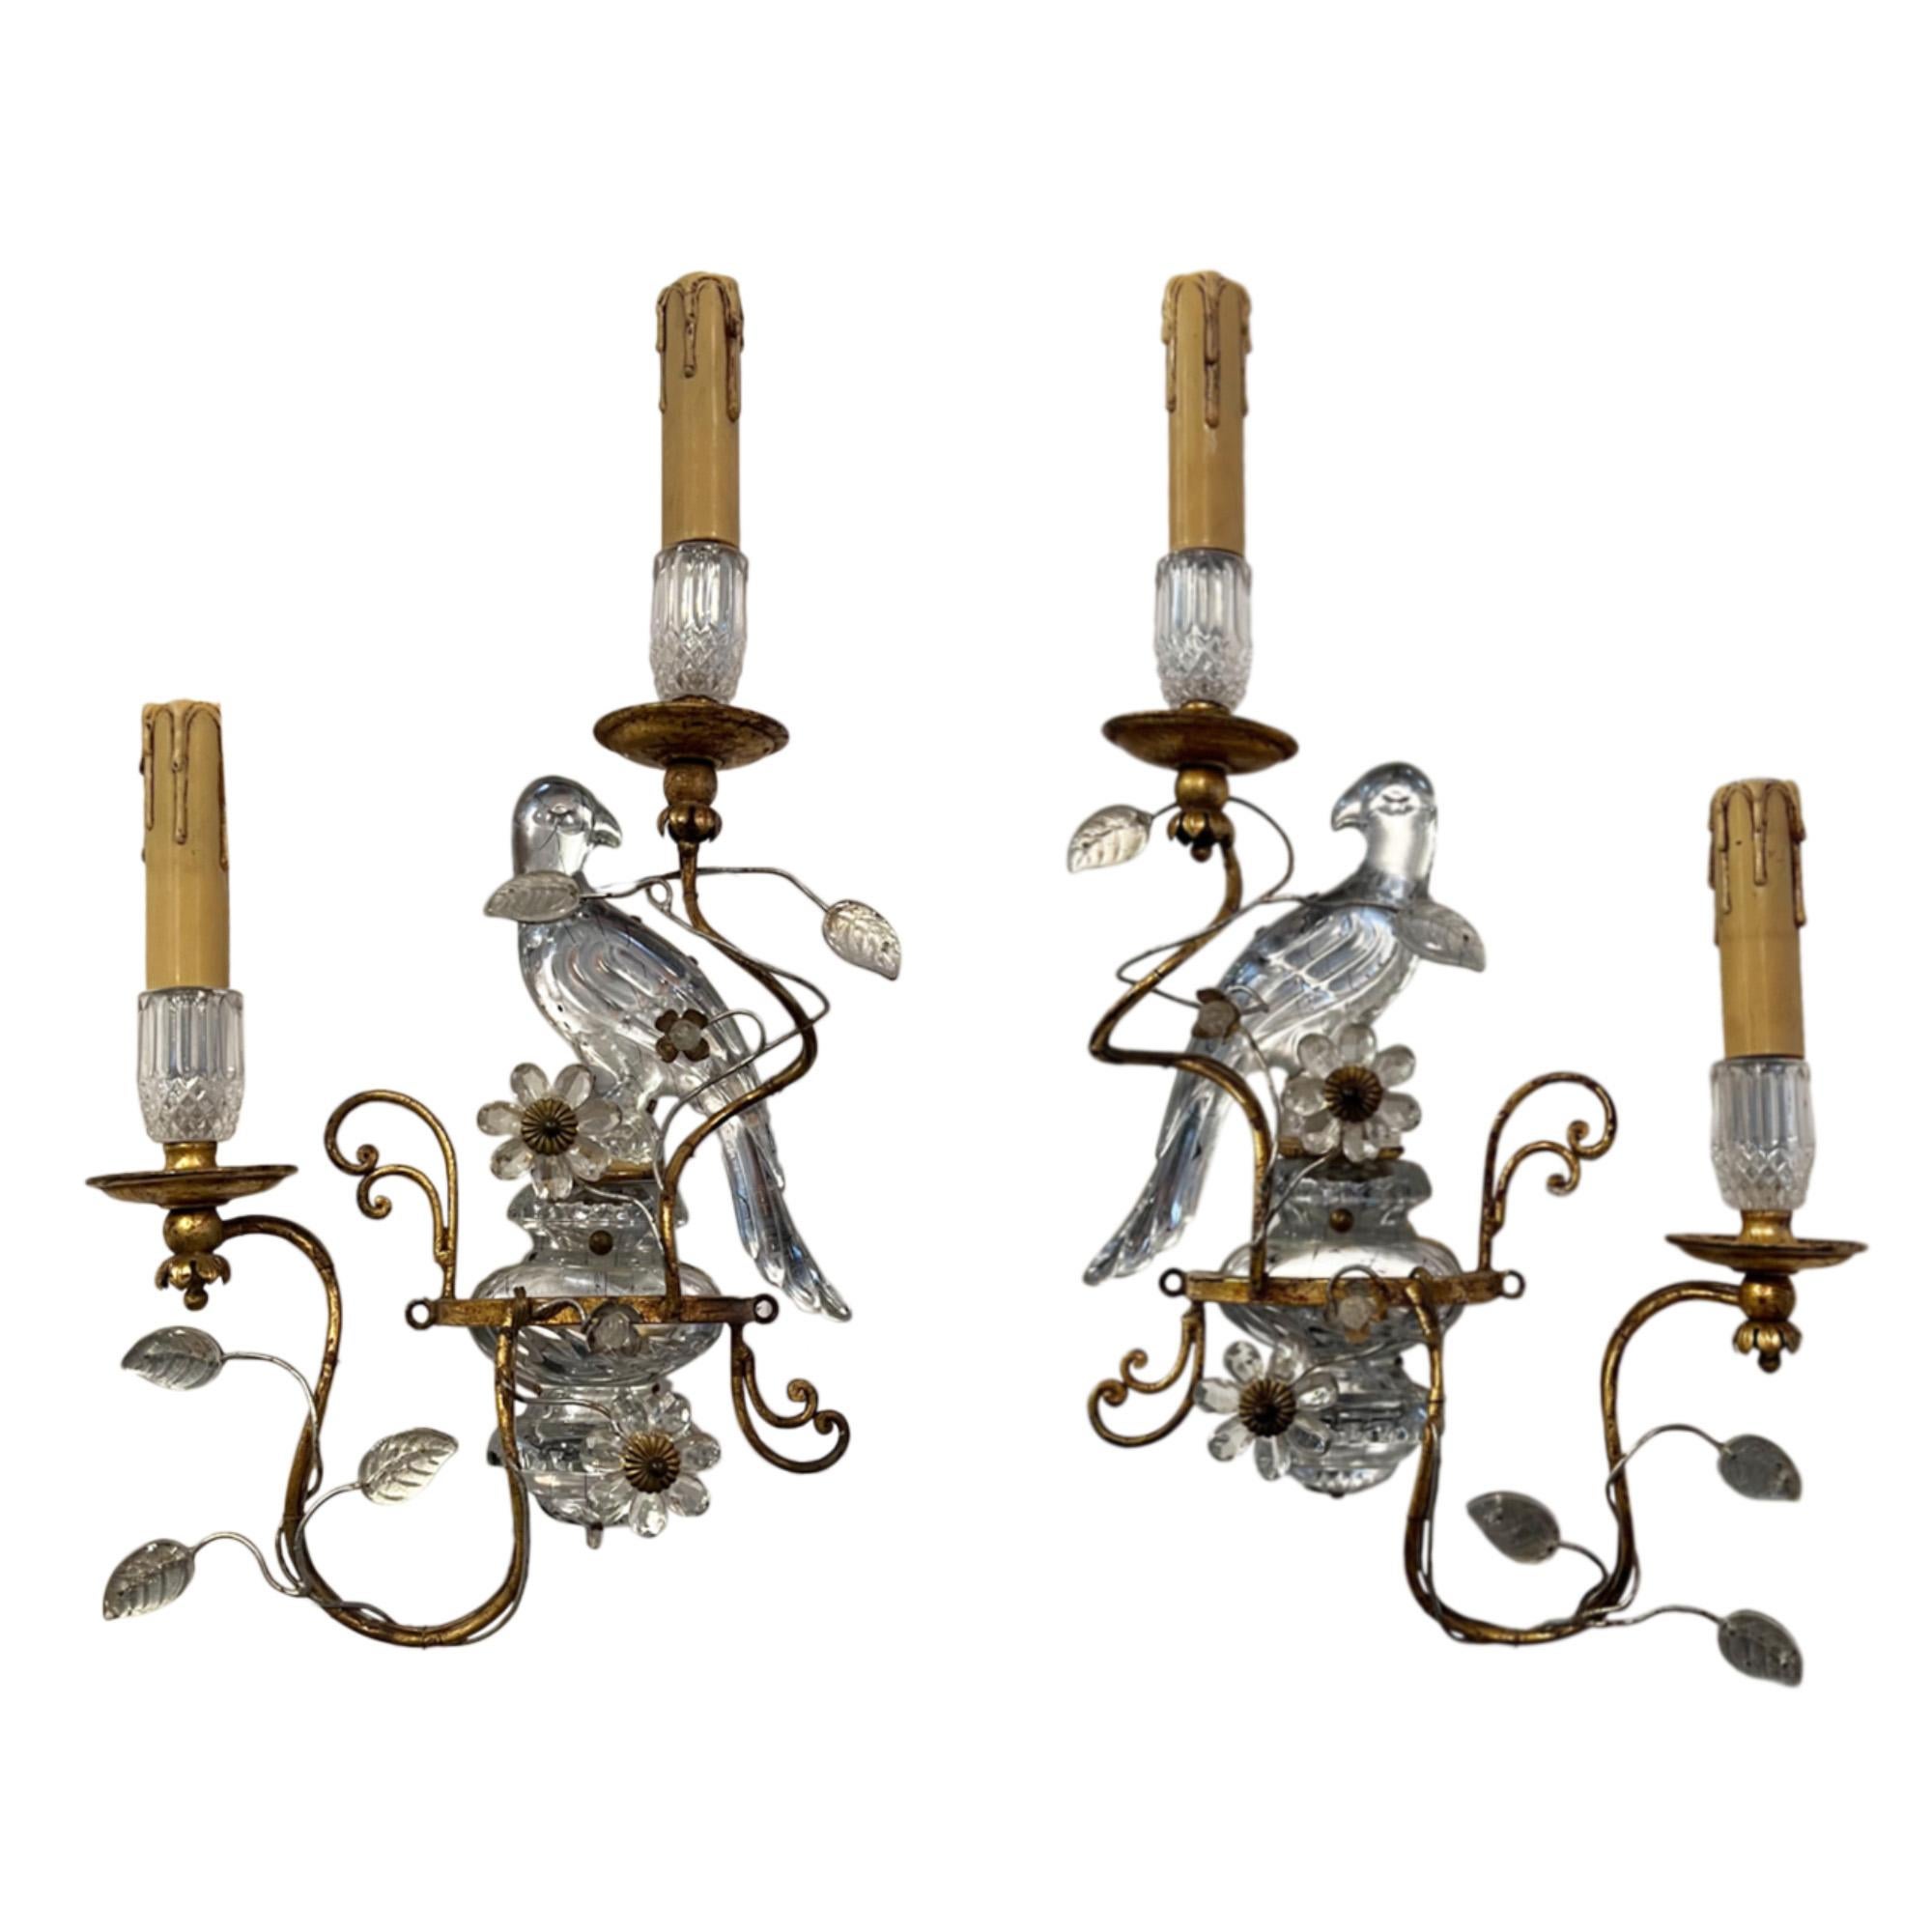 A pair of 1960s Italian Baguès style wall sconces, with parrots and urns. These sconces are made by Banci and are a very similar style and quality to the Parisan light atelier Maison Baguès. 

Founded in the heart of Florence in 1899 as a workshop